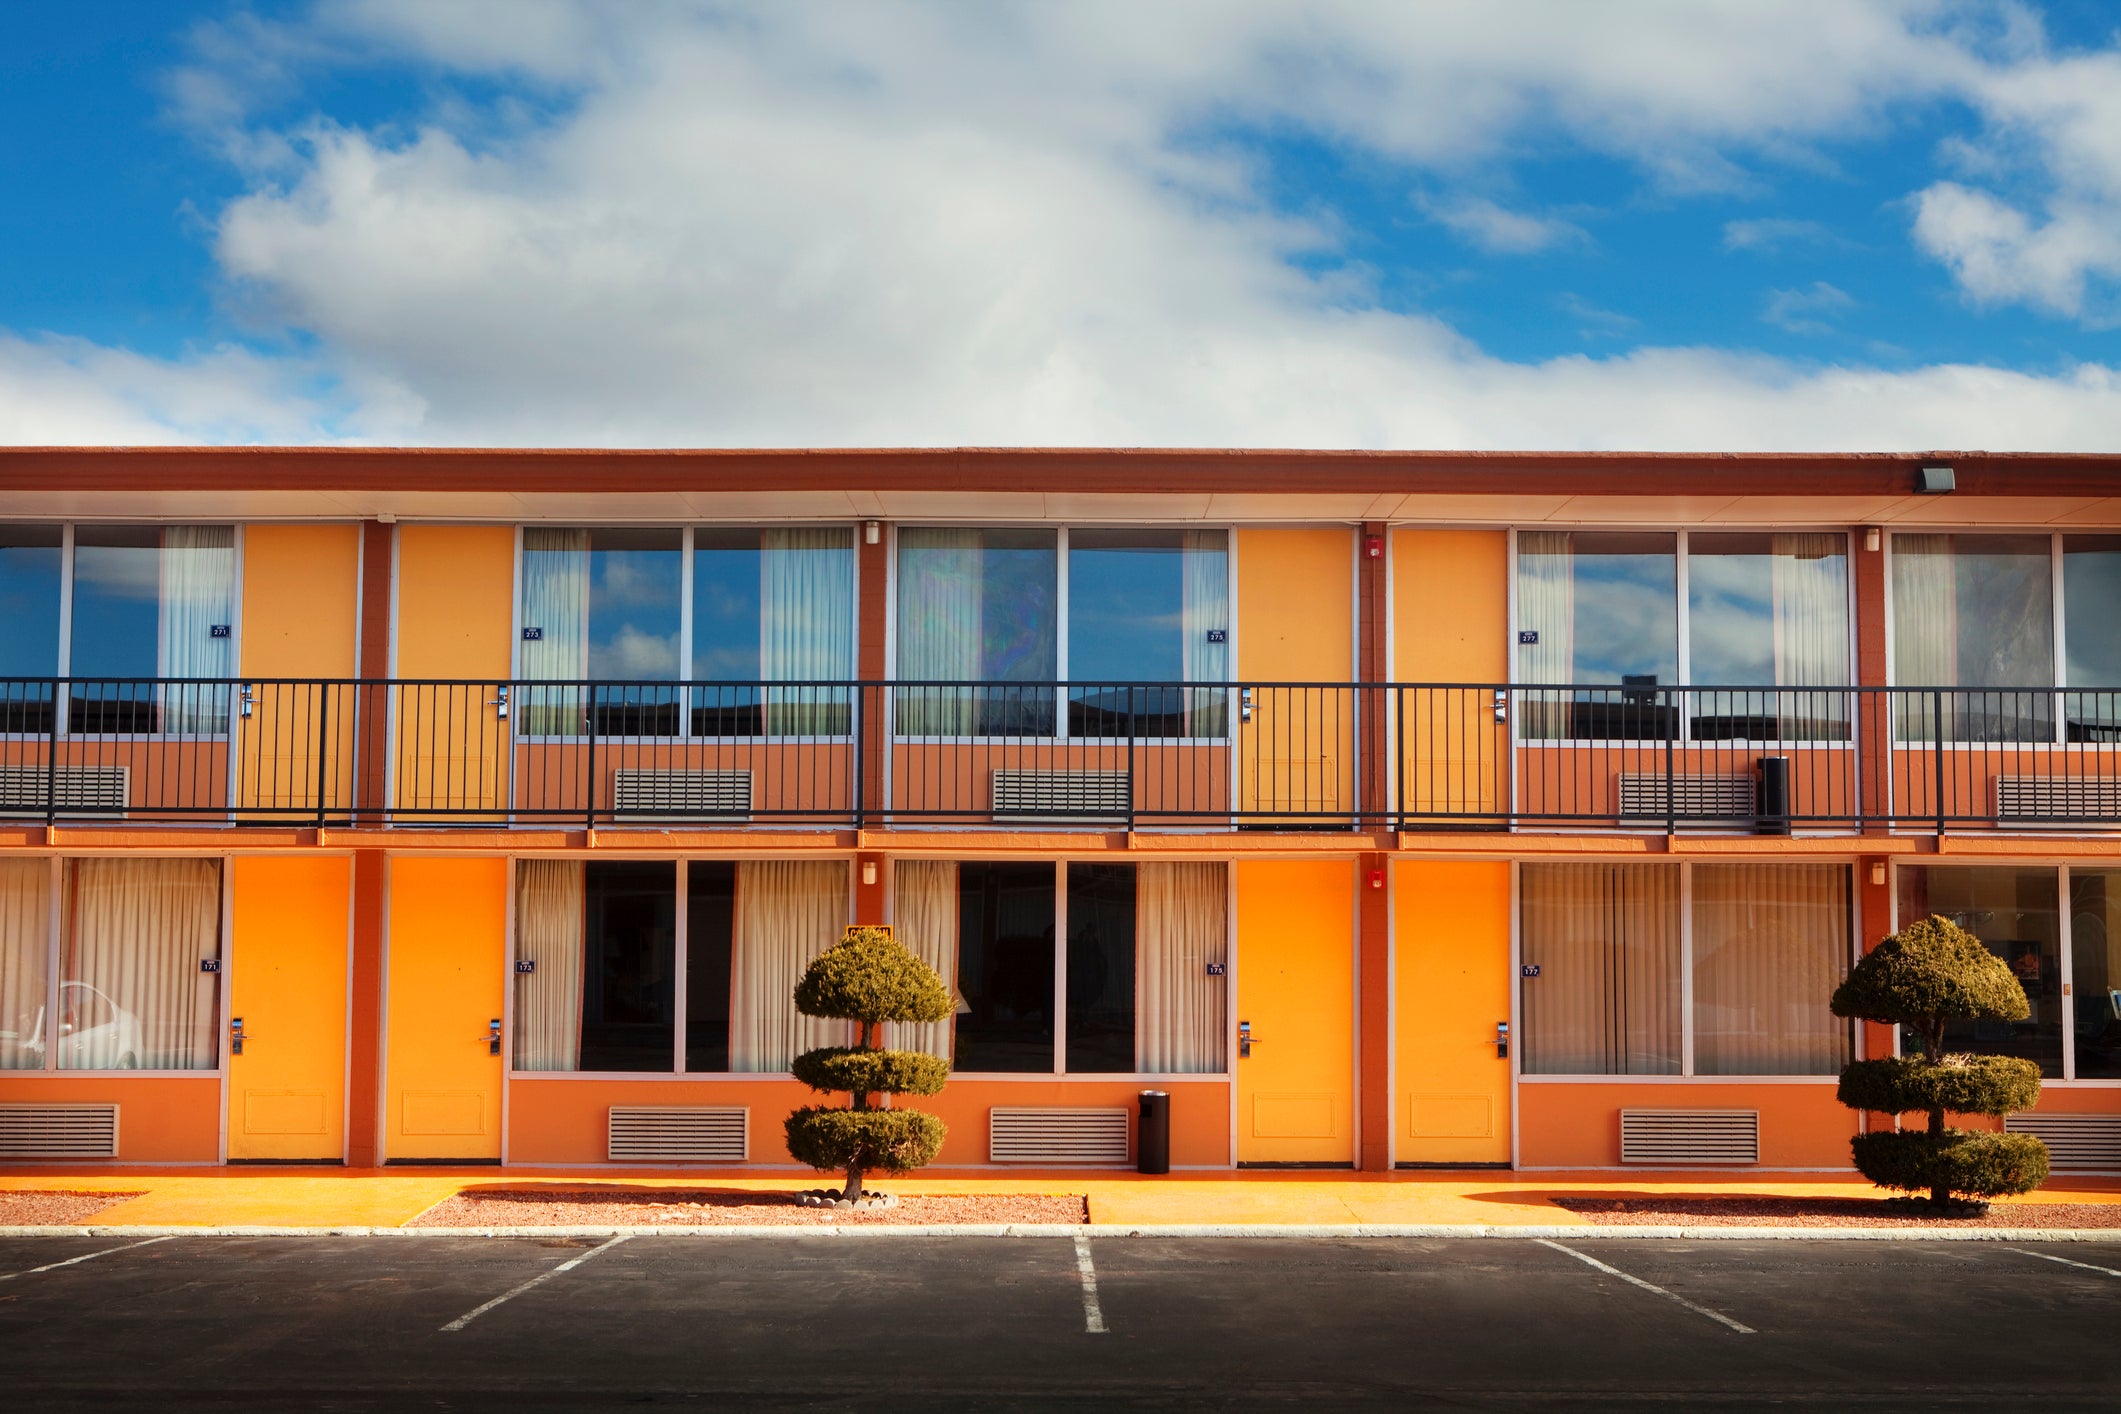 Parking lot, doors and windows of motel